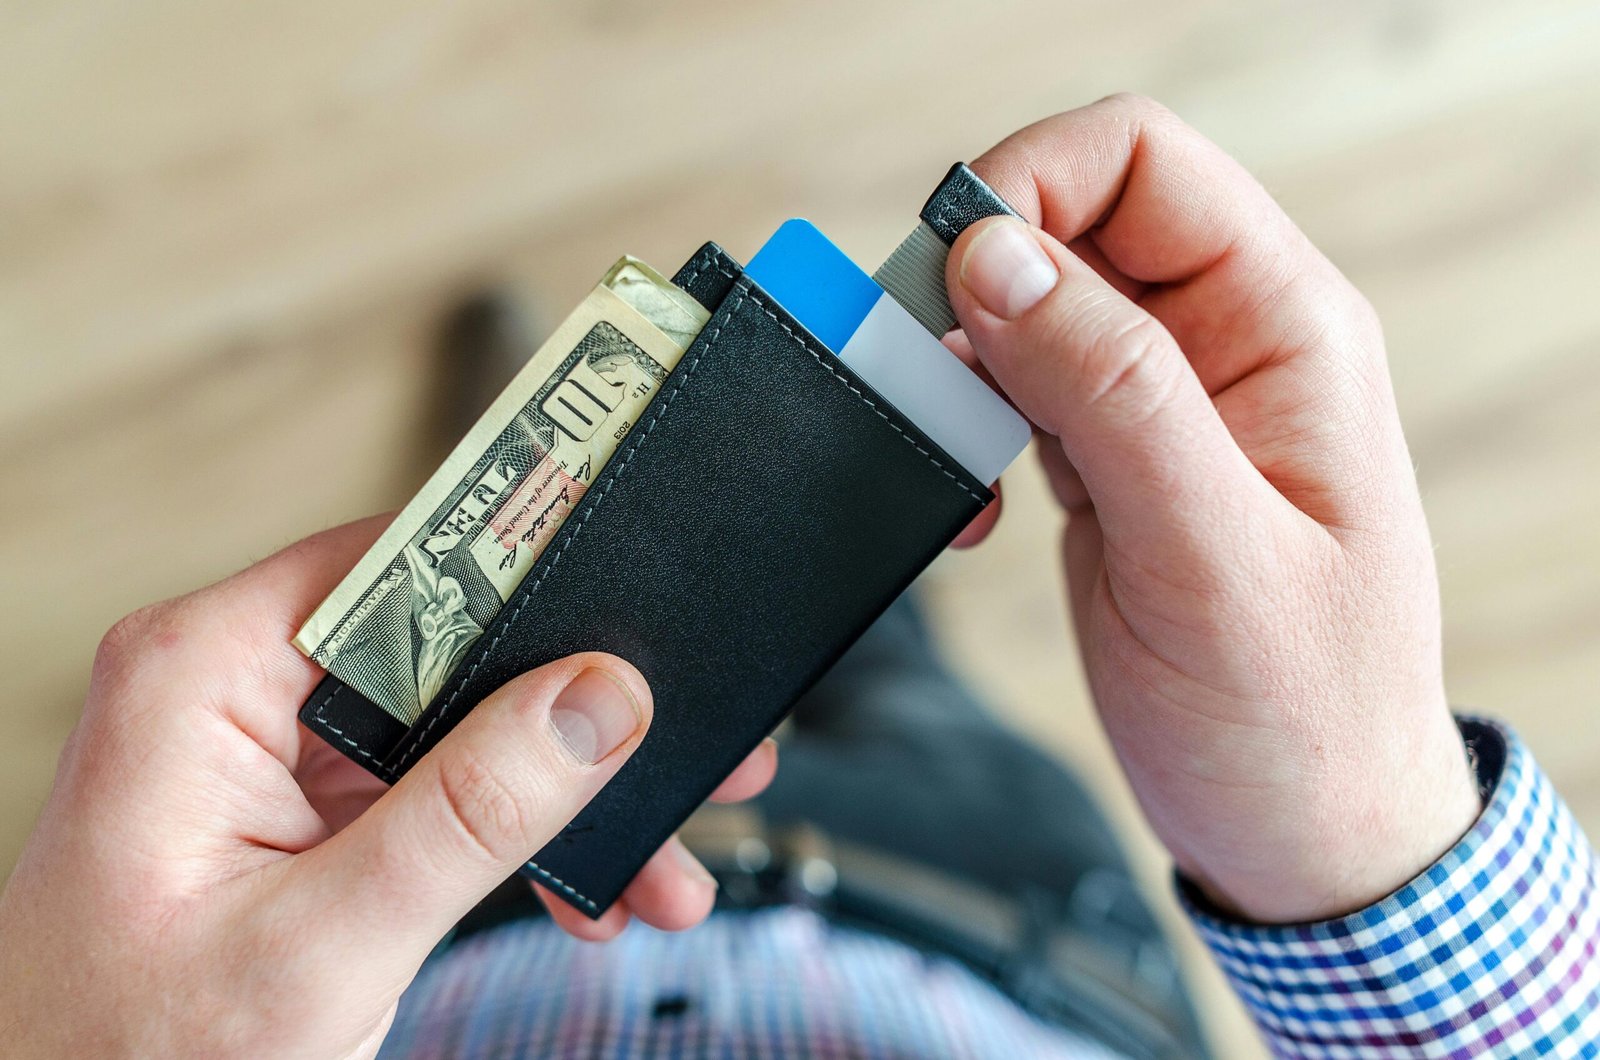 The Latest Personalization Trends in Wallets